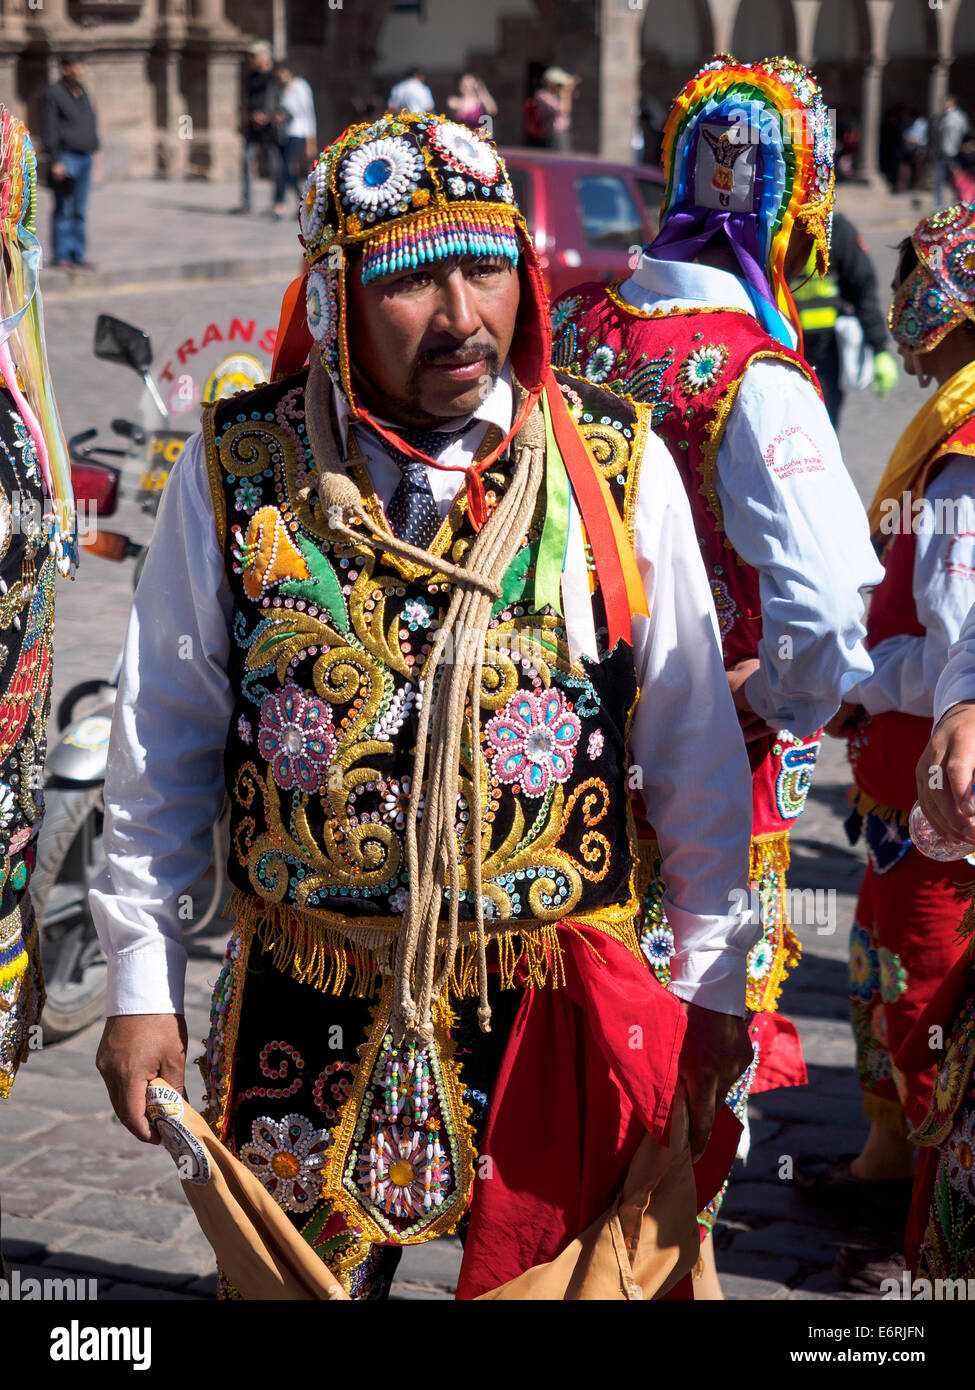 People from all regions gather to Cusco for the Qoyllority (or Qoyllur Rit'i) pilgrimage to the mountain sanctuary of Sinakara - Stock Photo